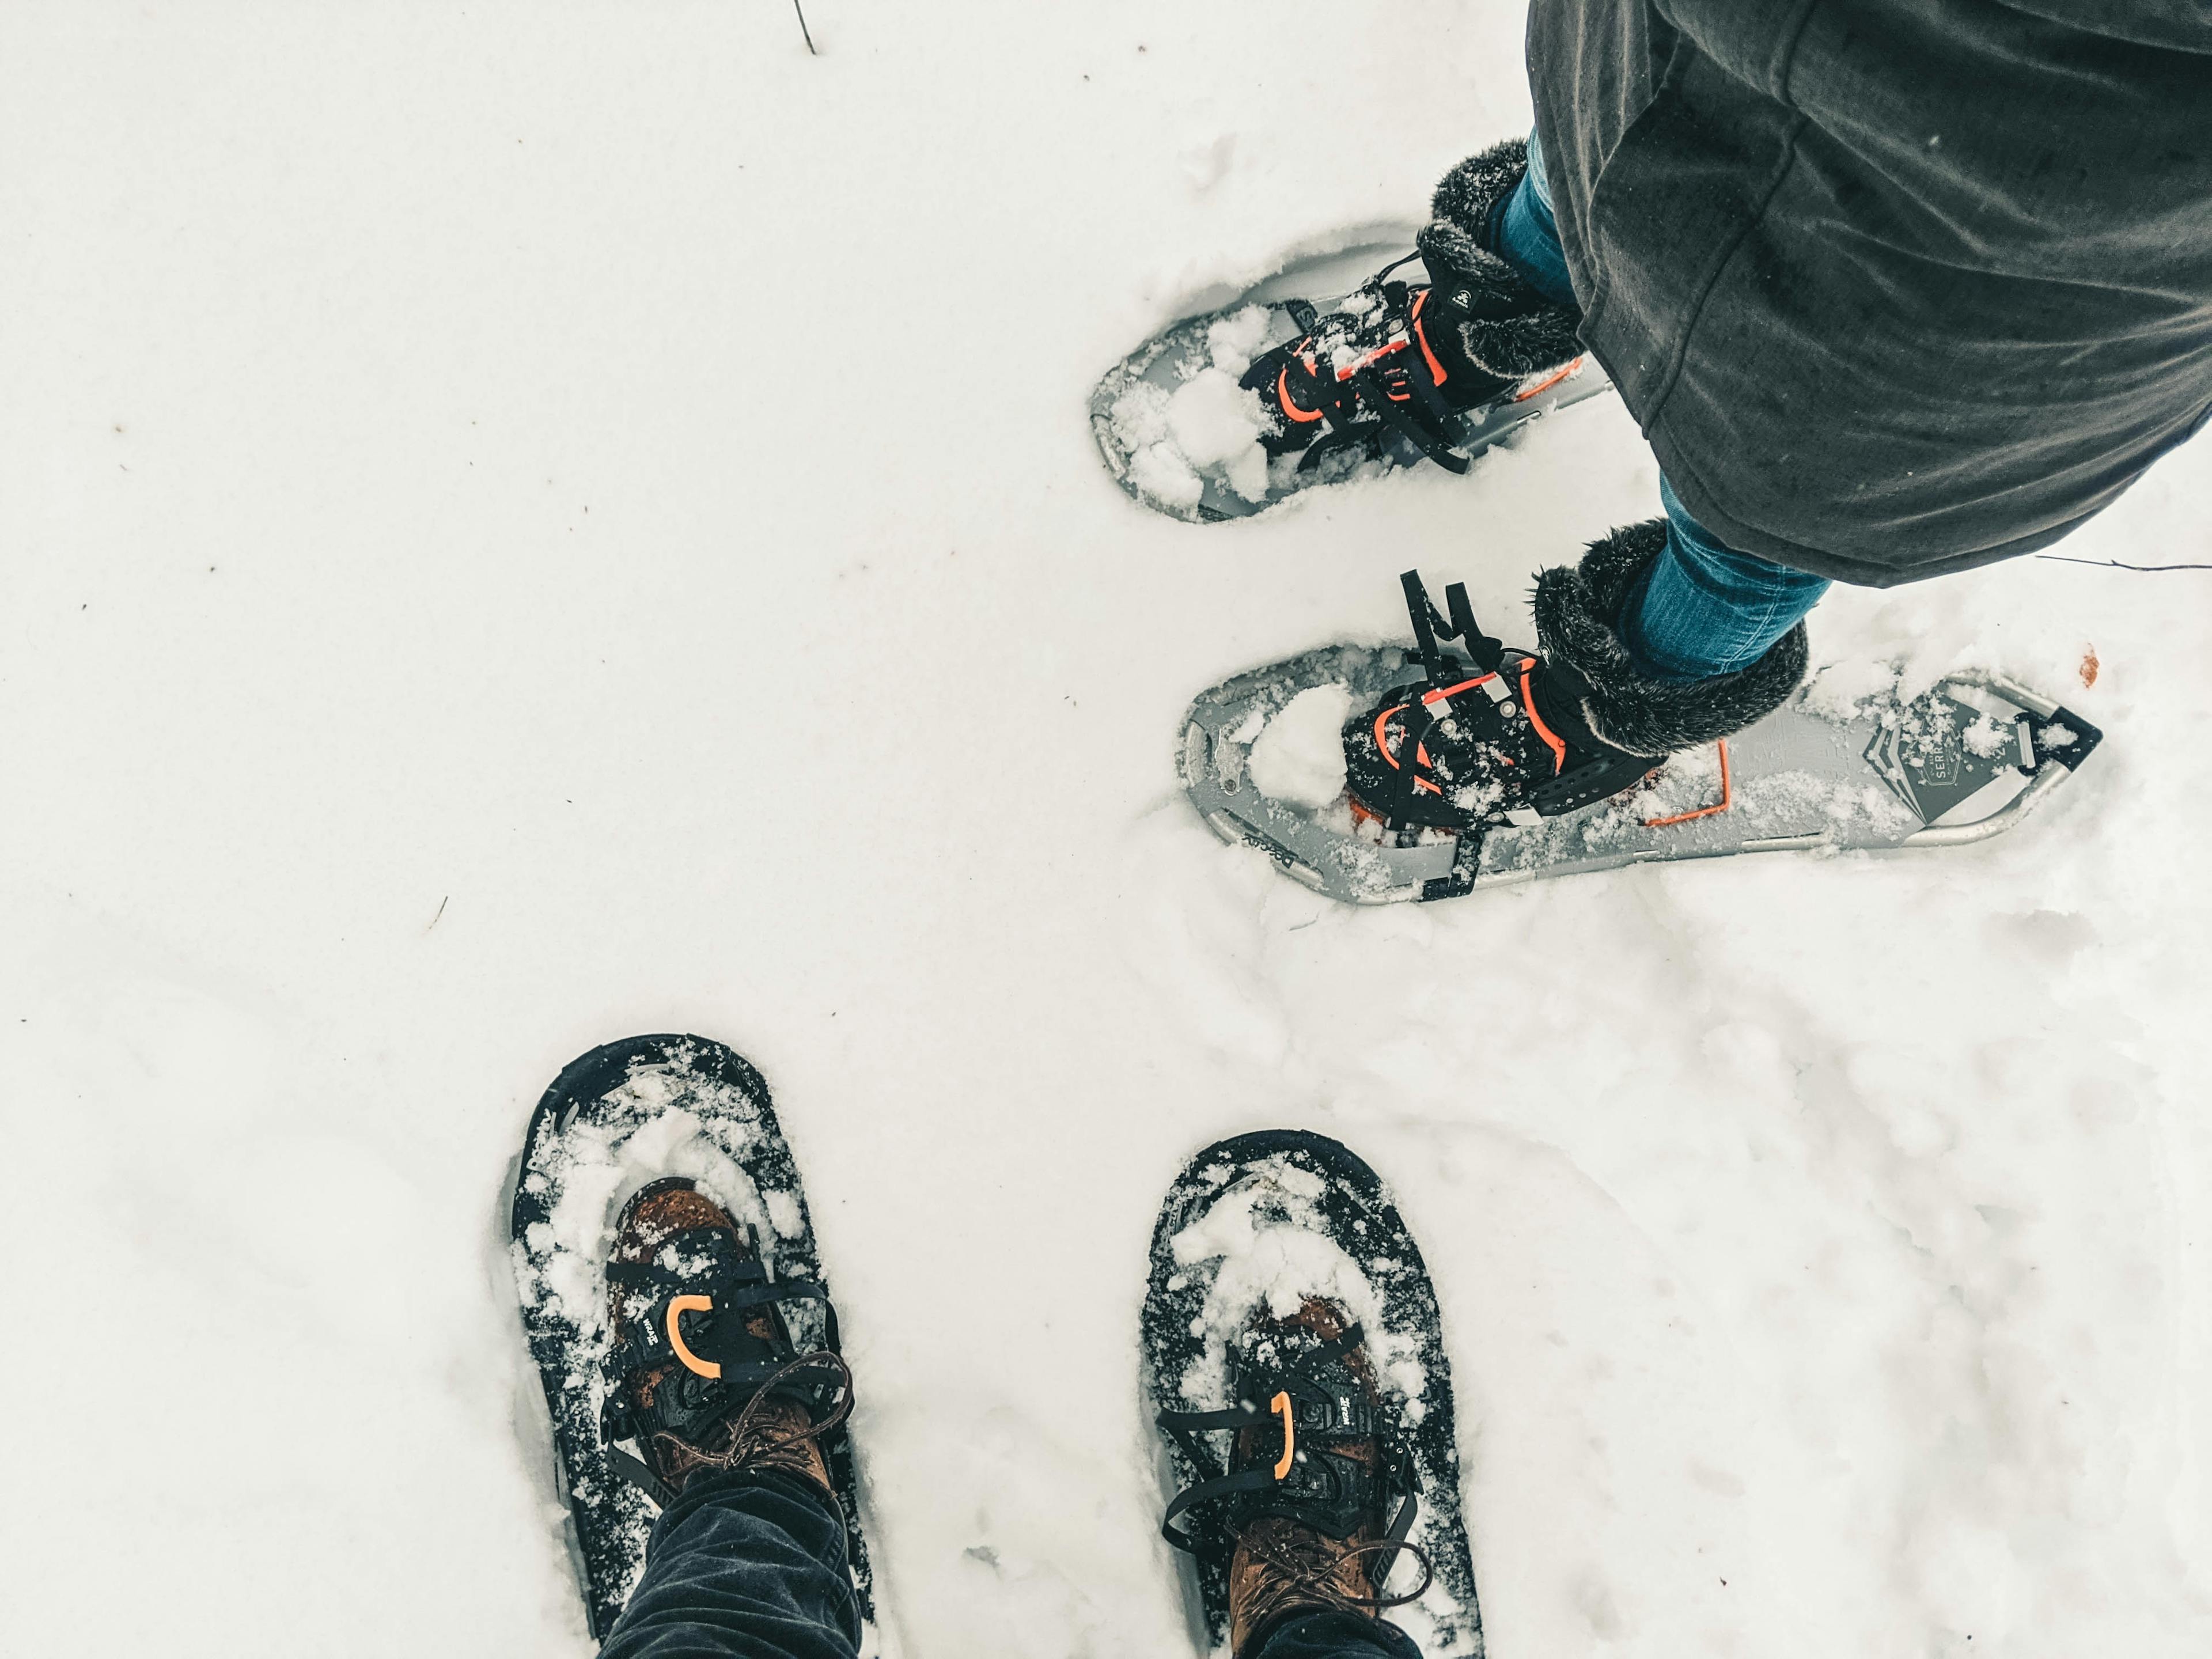 Couple going snow shoeing in French Alps